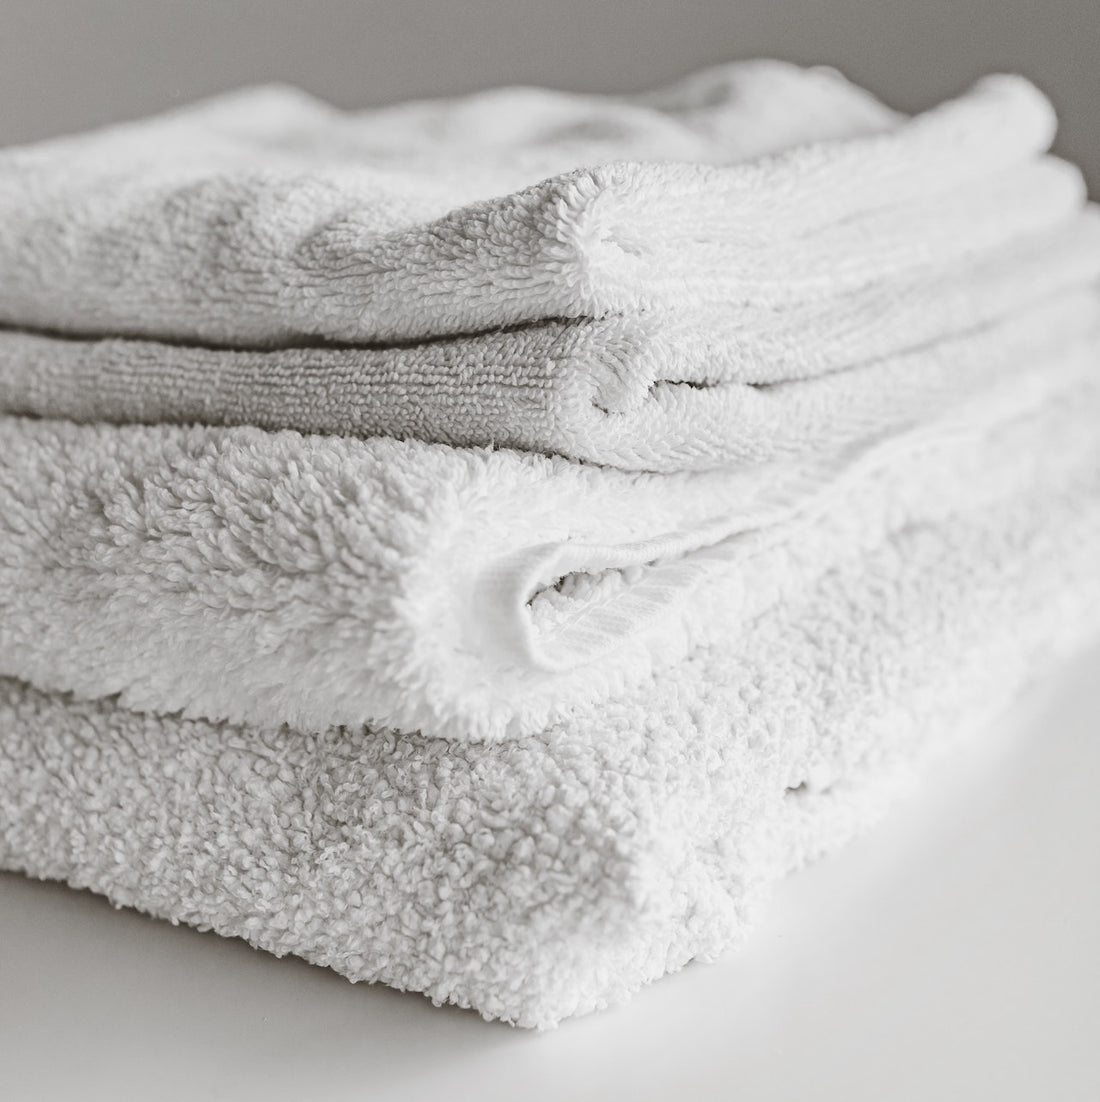 Weight Per Dozen vs. GSM Explained: Weighing Quality in Wholesale Towels